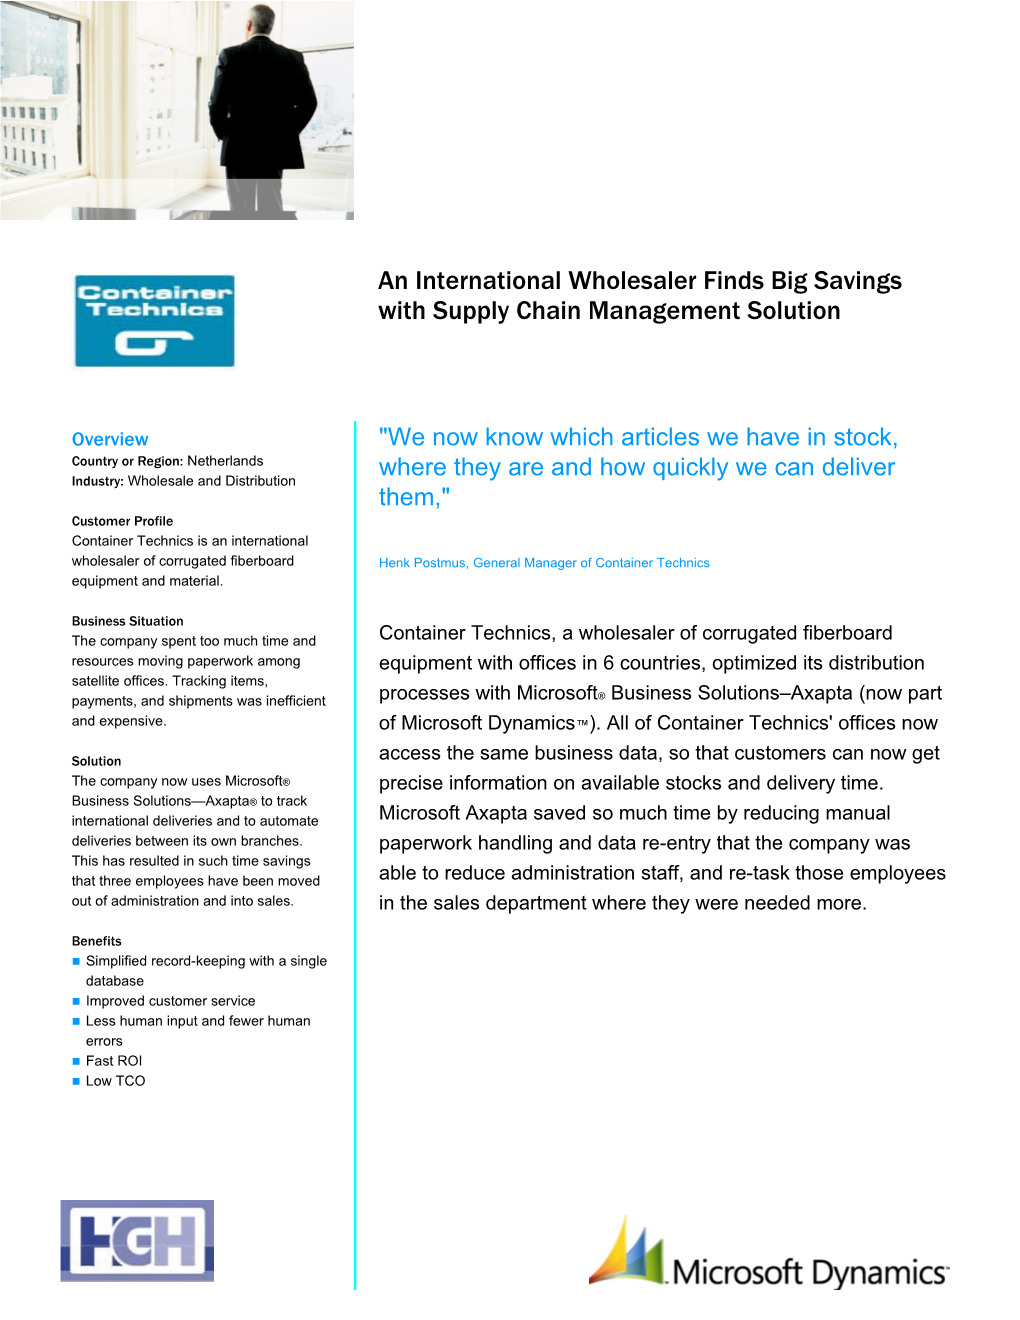 An International Wholesaler Finds Big Savings with Supply Chain Management Solution